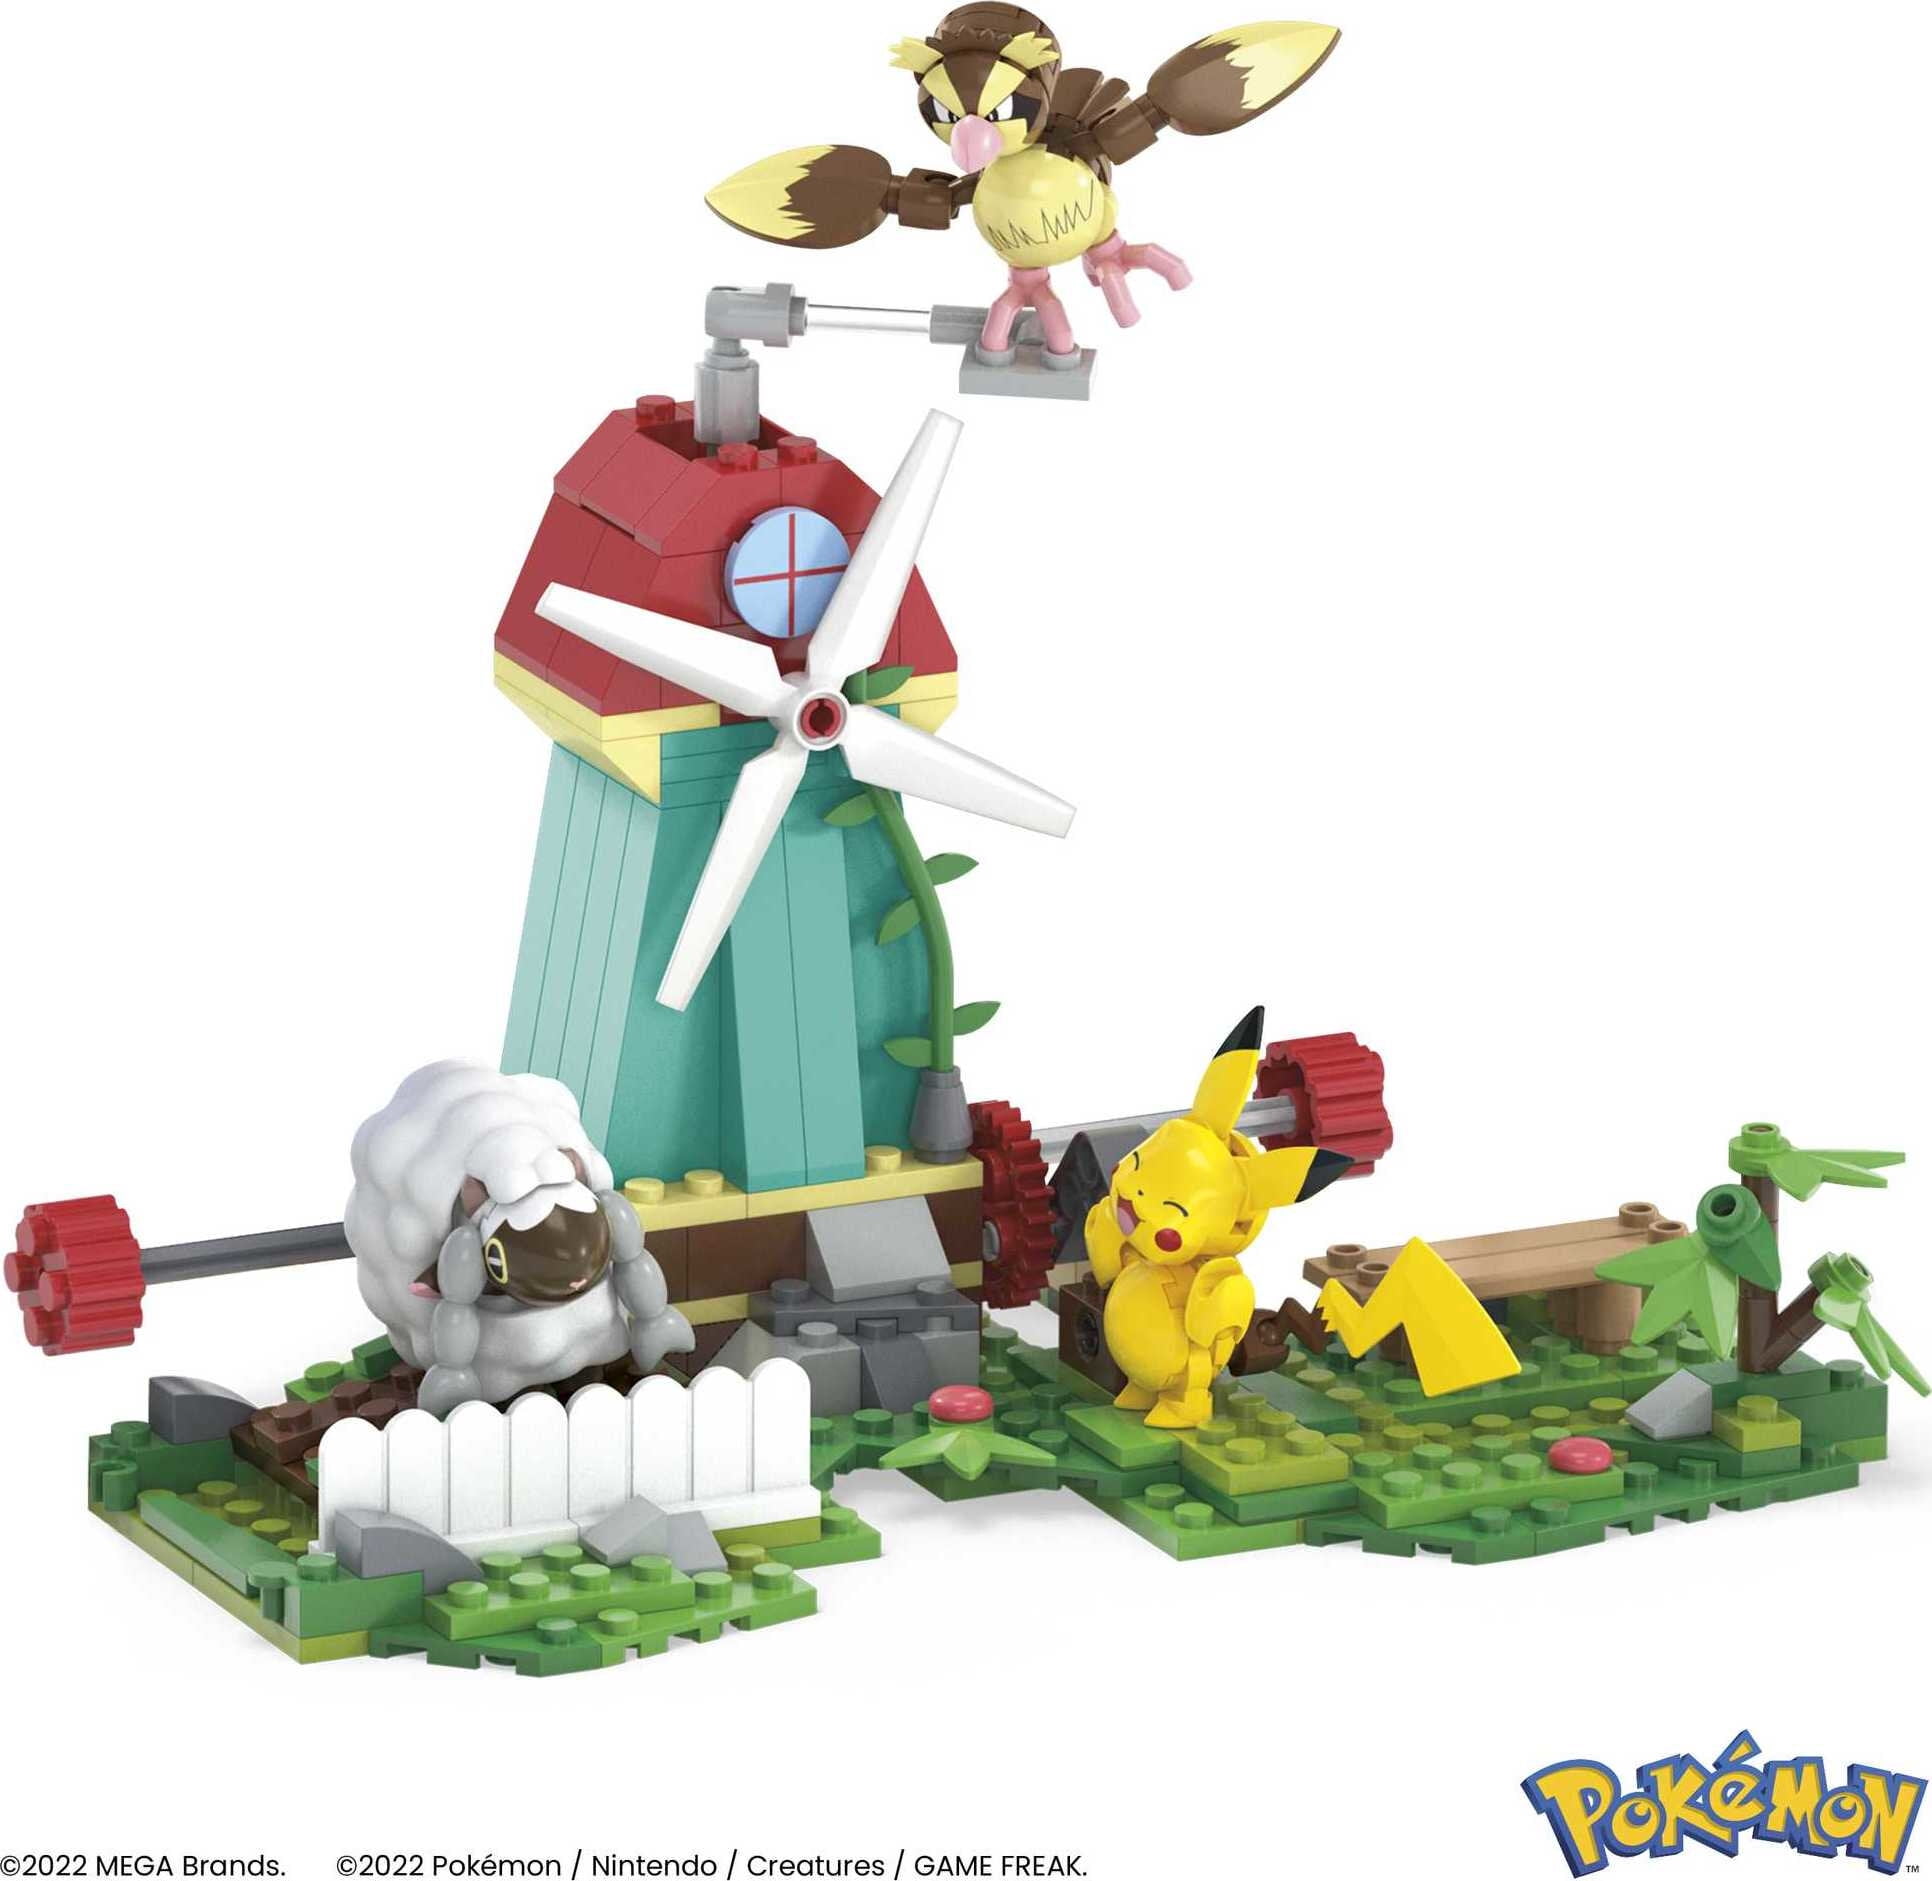 MEGA Pokemon Countryside Windmill with Action Figures, Building